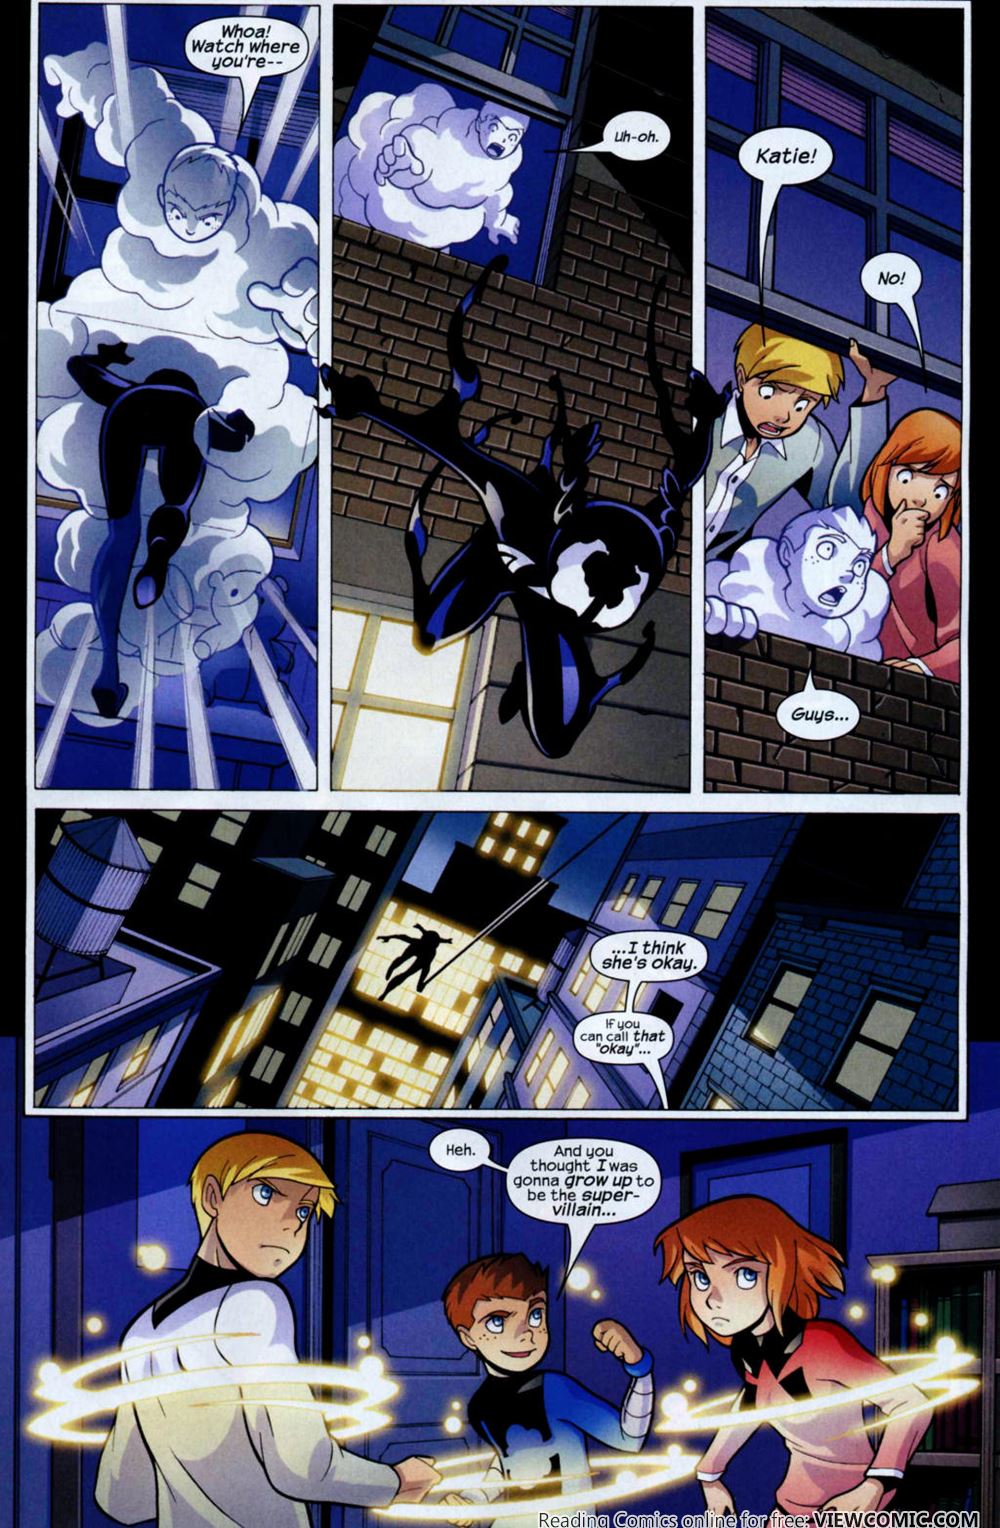 Spider Man And Power Pack 04 Of 04 07 Viewcomic Reading Comics Online For Free 19